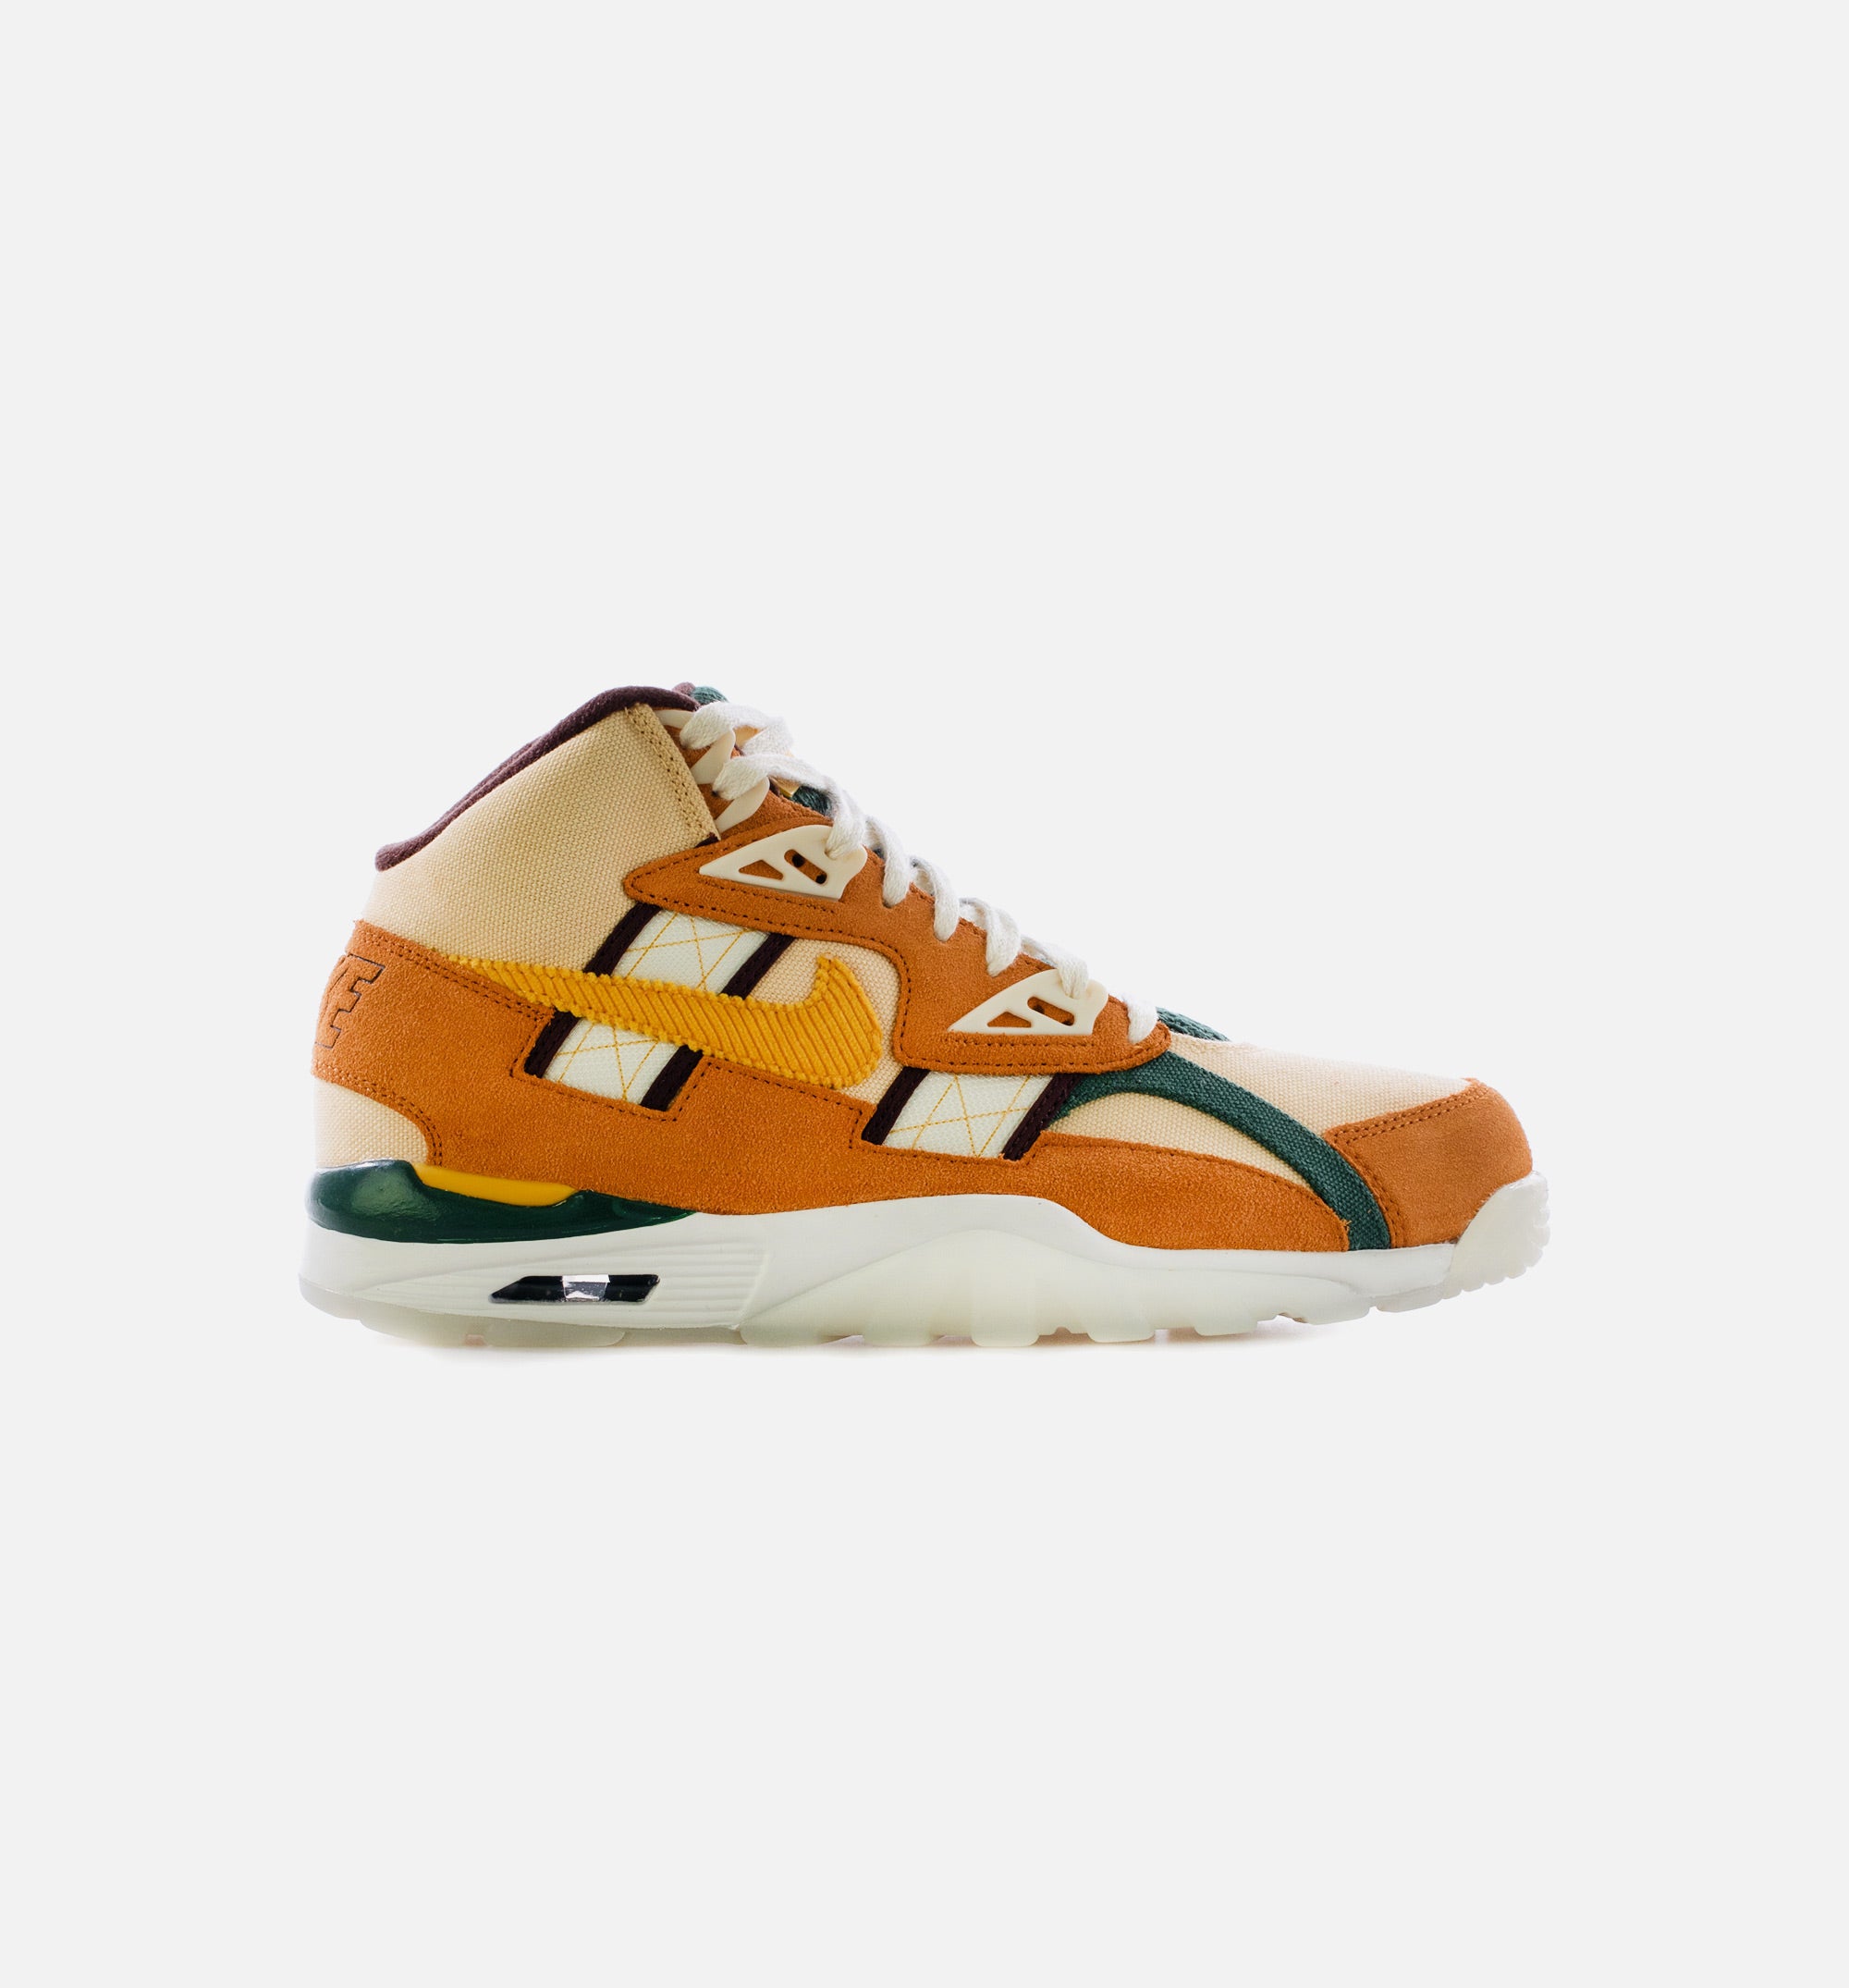 Nike Air Trainer SC Kids' Shoes